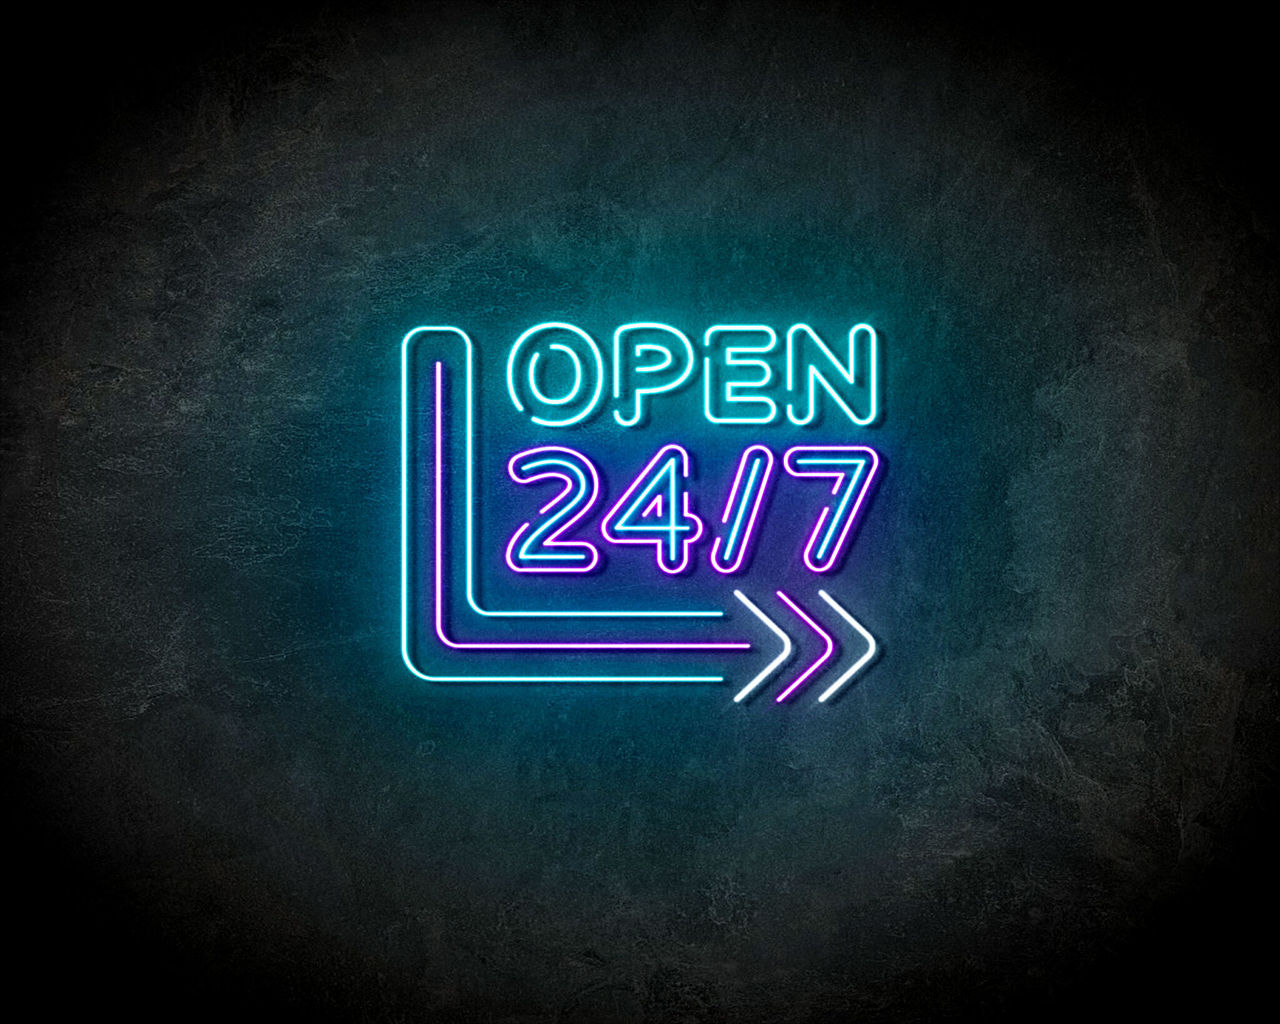 WE ARE OPEN YELLOW neon sign - LED Neon Leuchtreklame - LEDreclamebords.nl